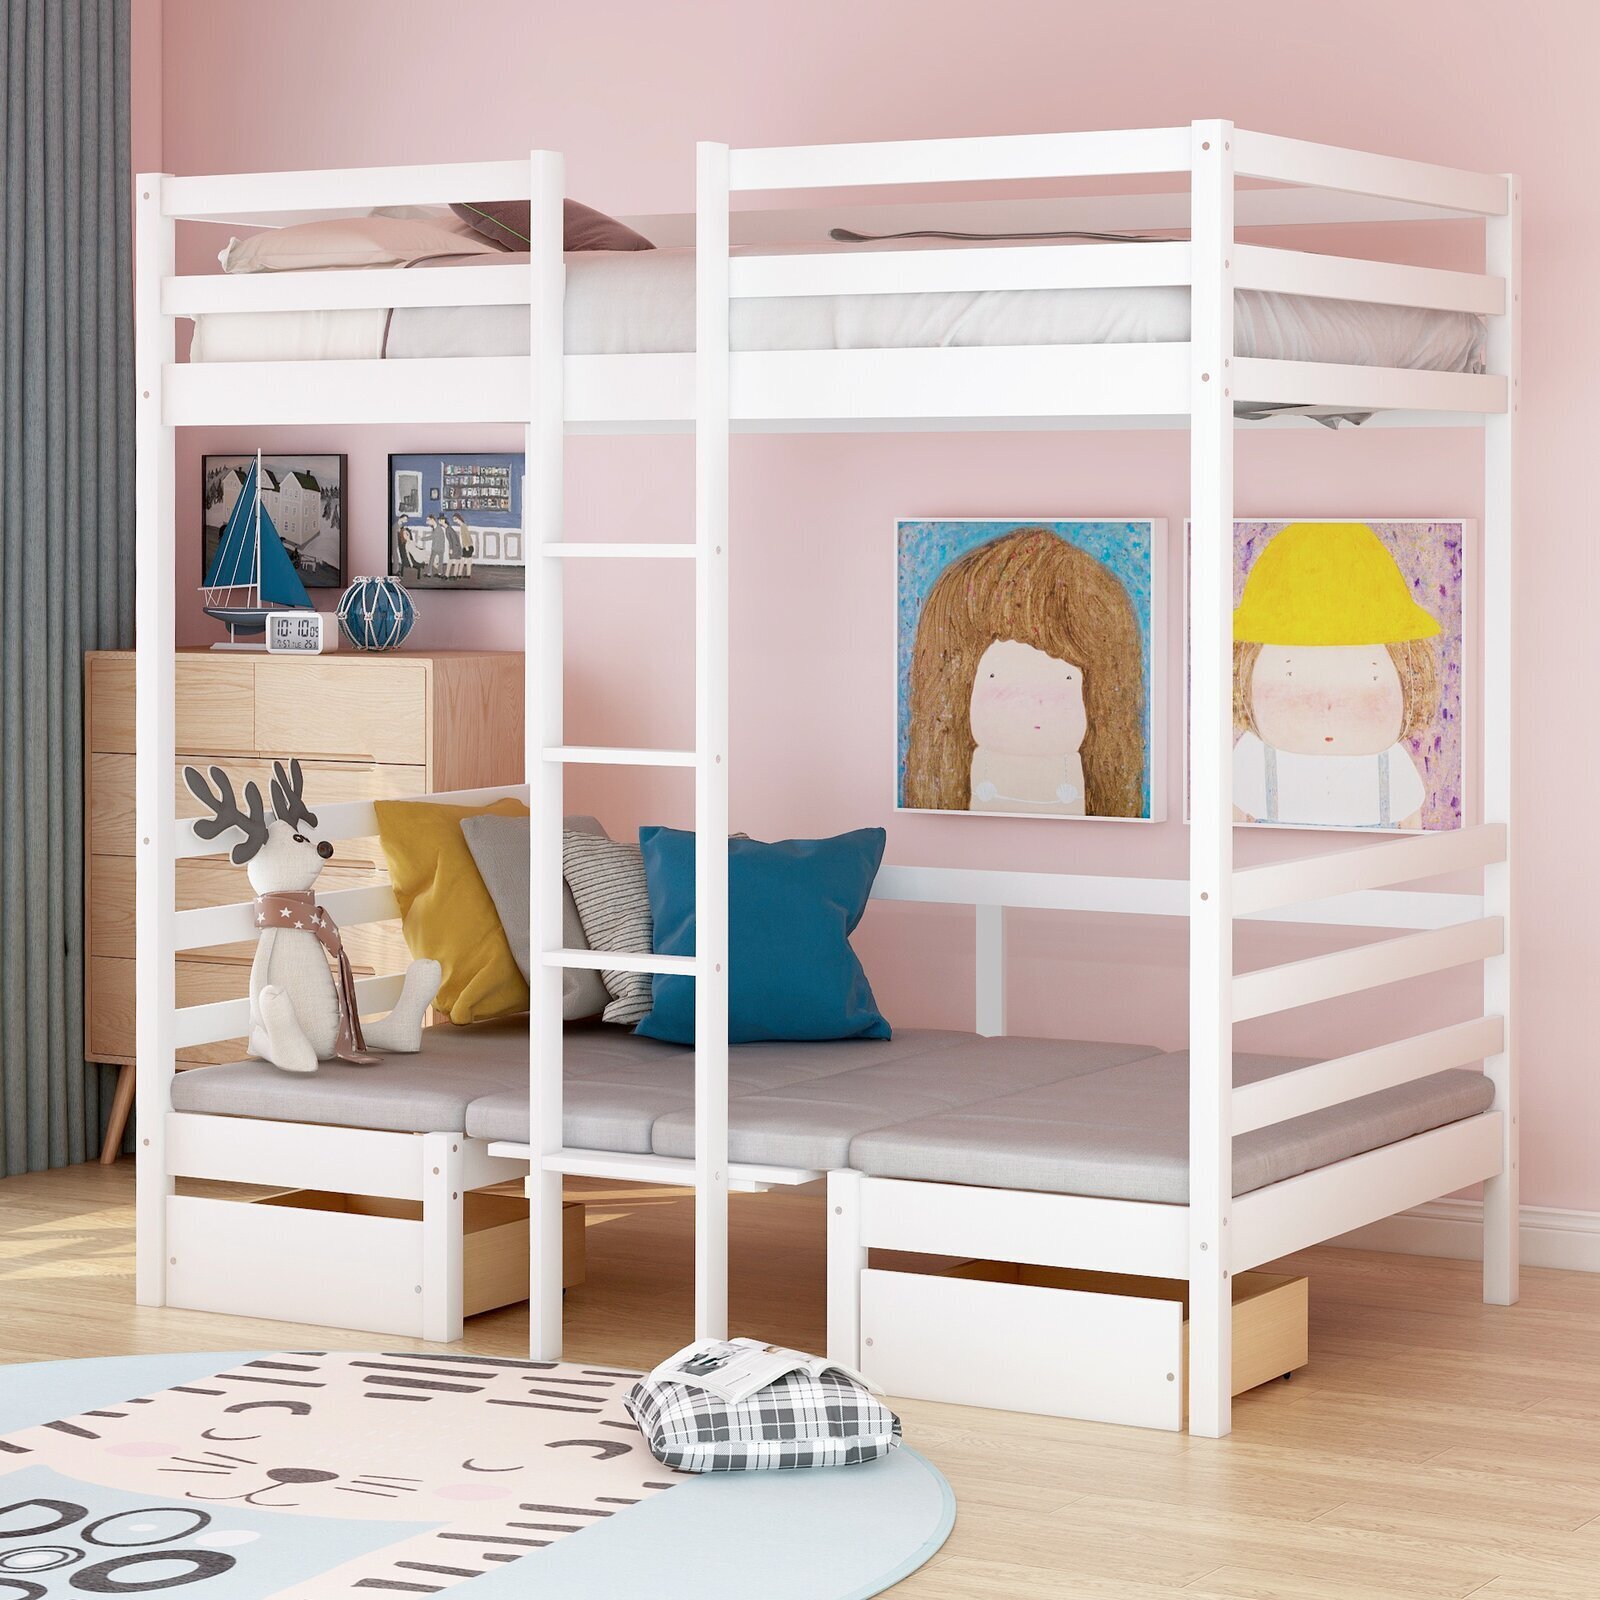 Multifunctional Bunk Beds With Desk